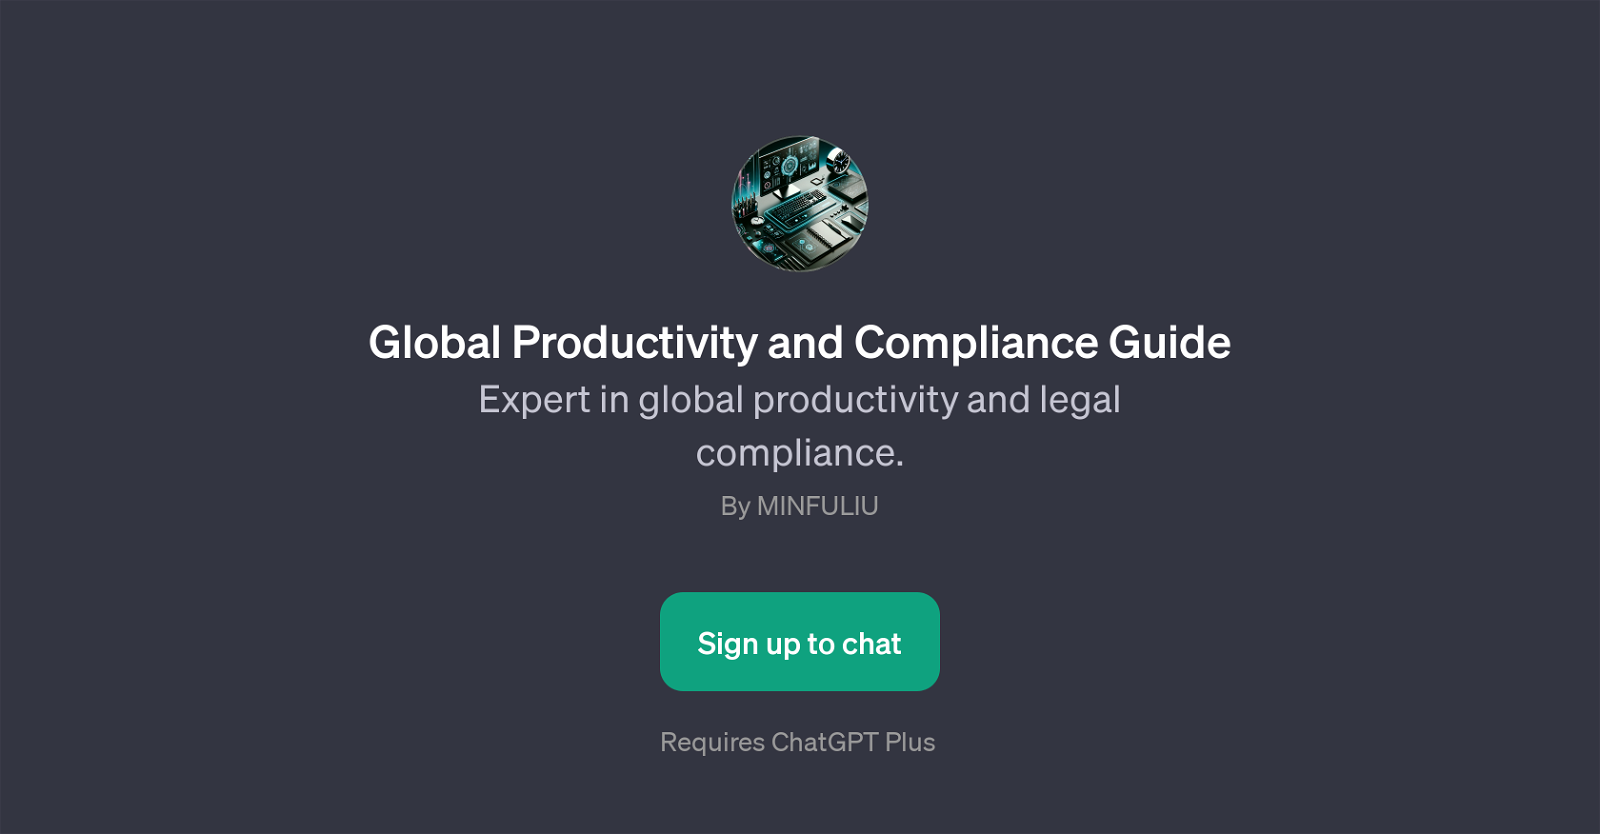 Global Productivity and Compliance Guide website